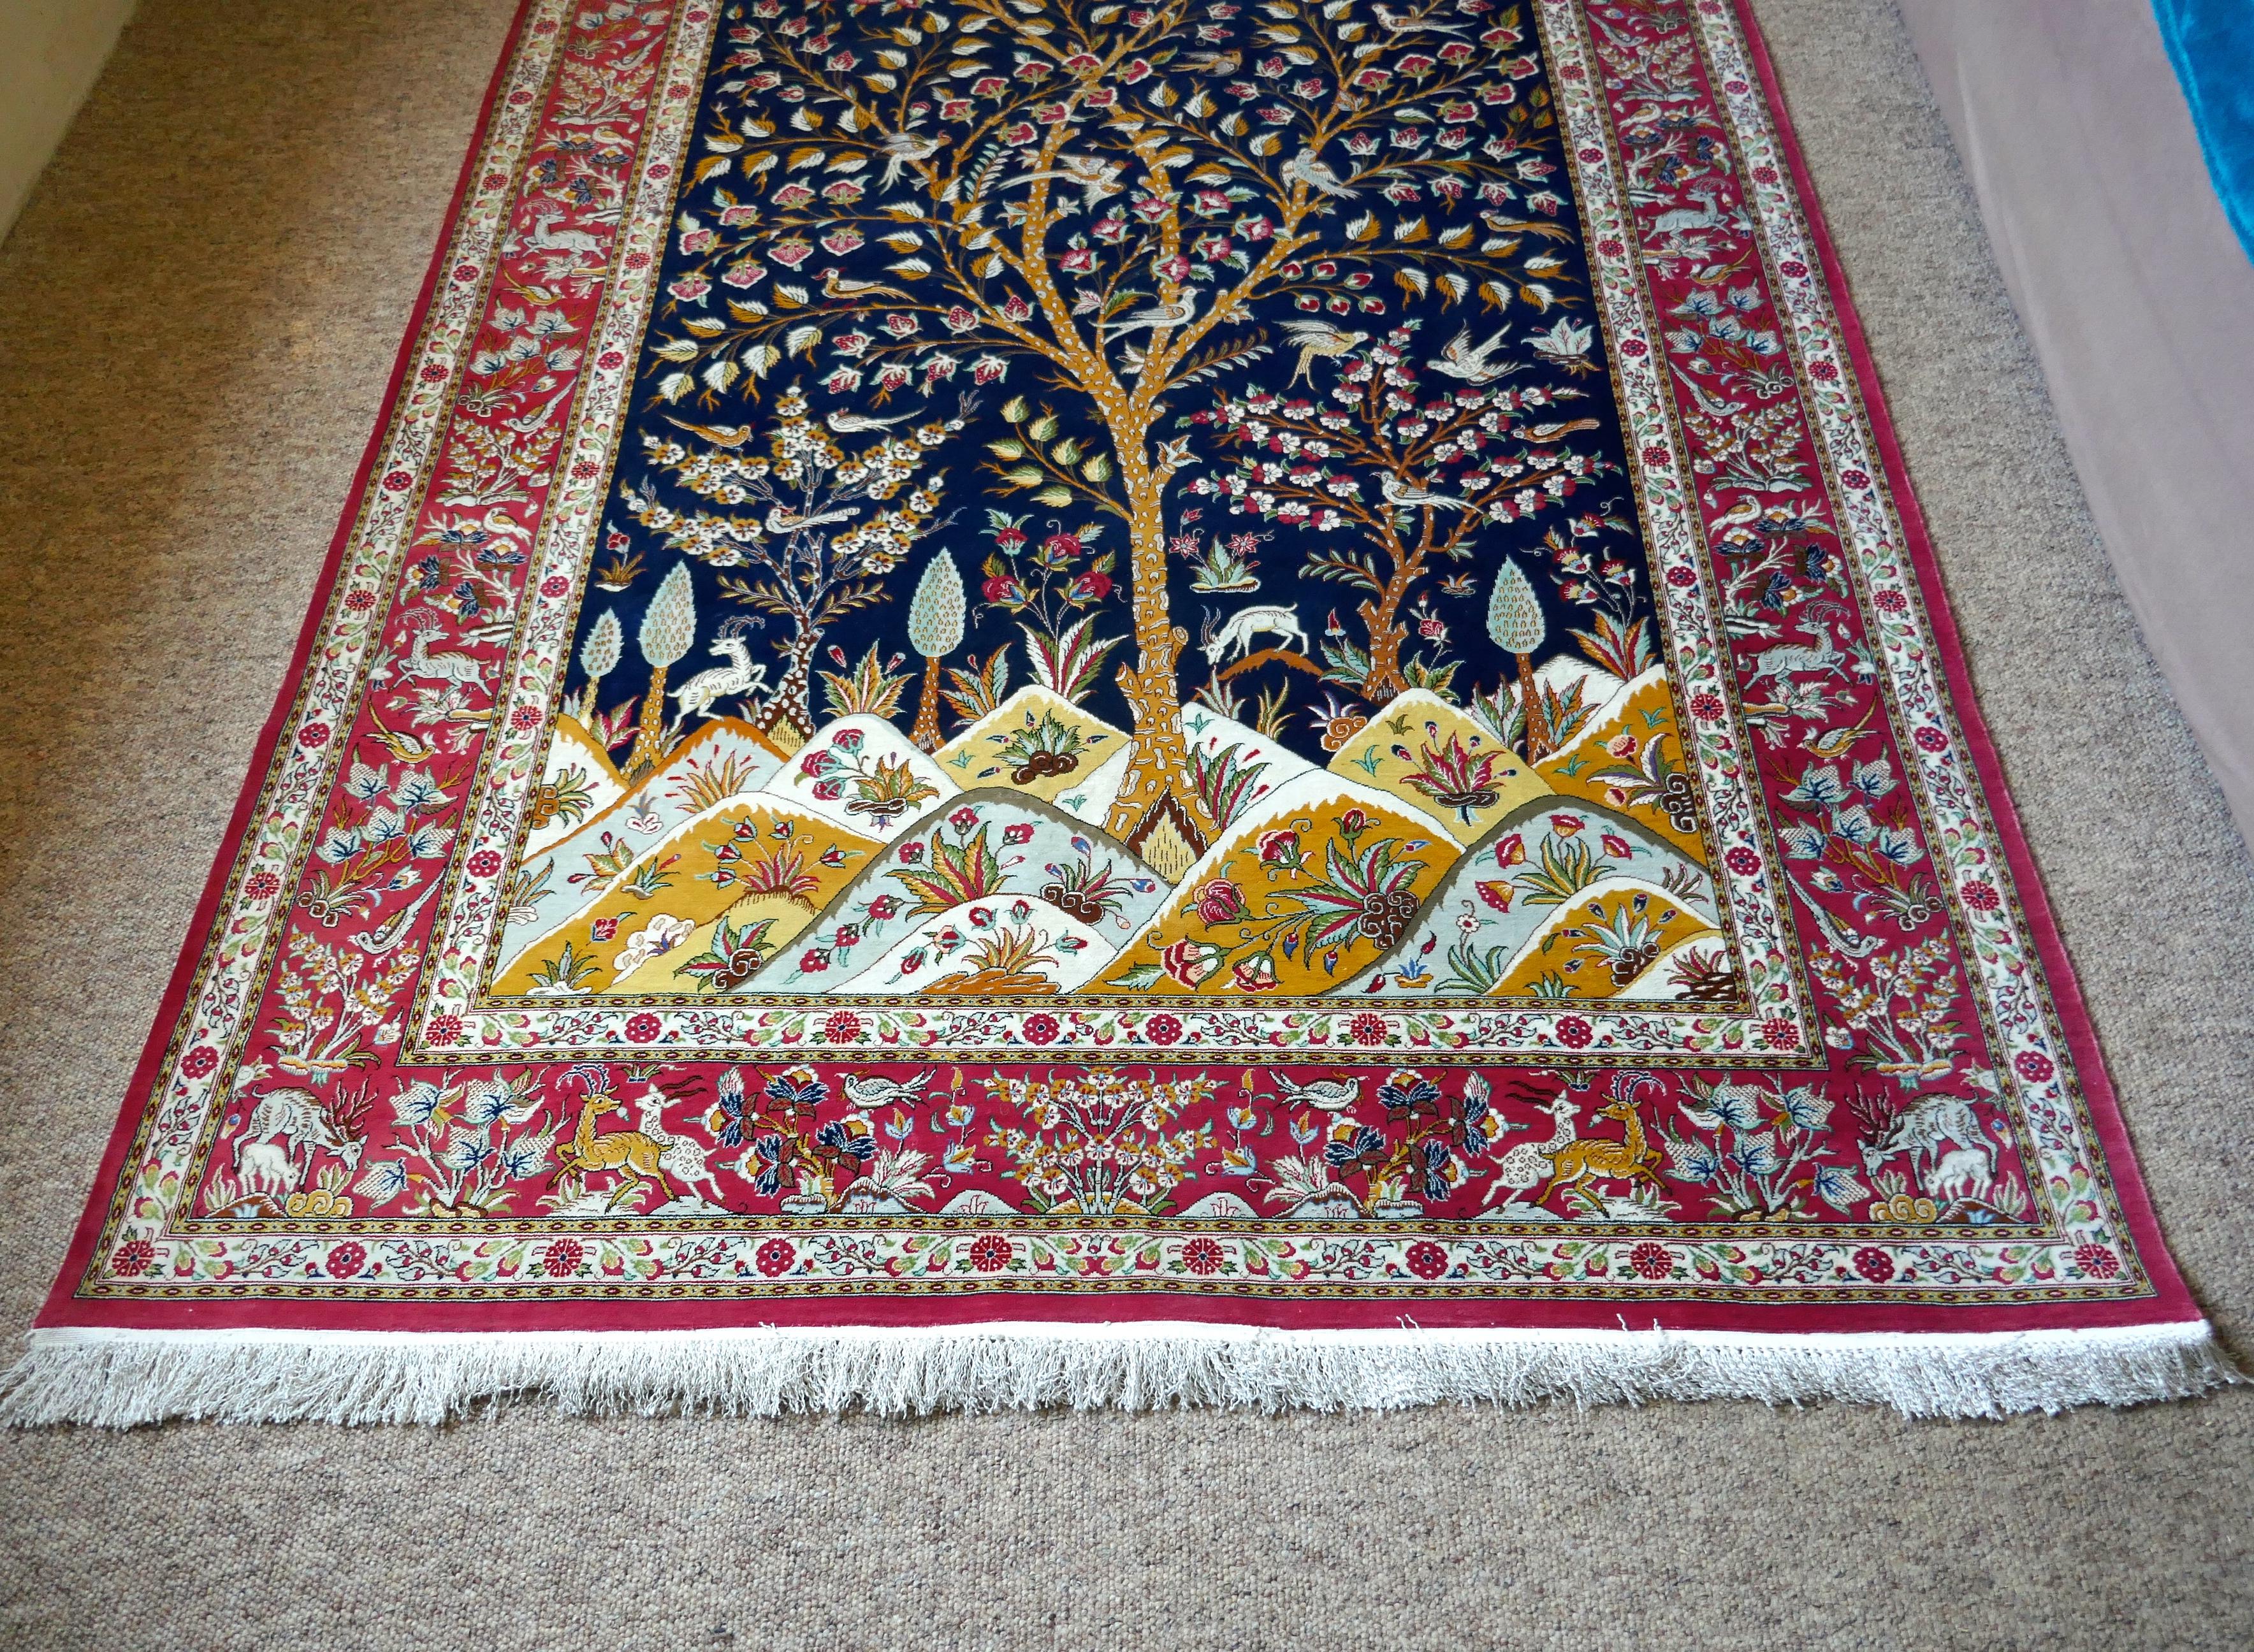 A beautiful signed hand-knotted tree of life pattern Qom Persian silk rug.

The asymmetrical centre panel of this intricate and luscious rug focuses on the iconic tree of life which is surrounded by the birds of paradise on a midnight blue